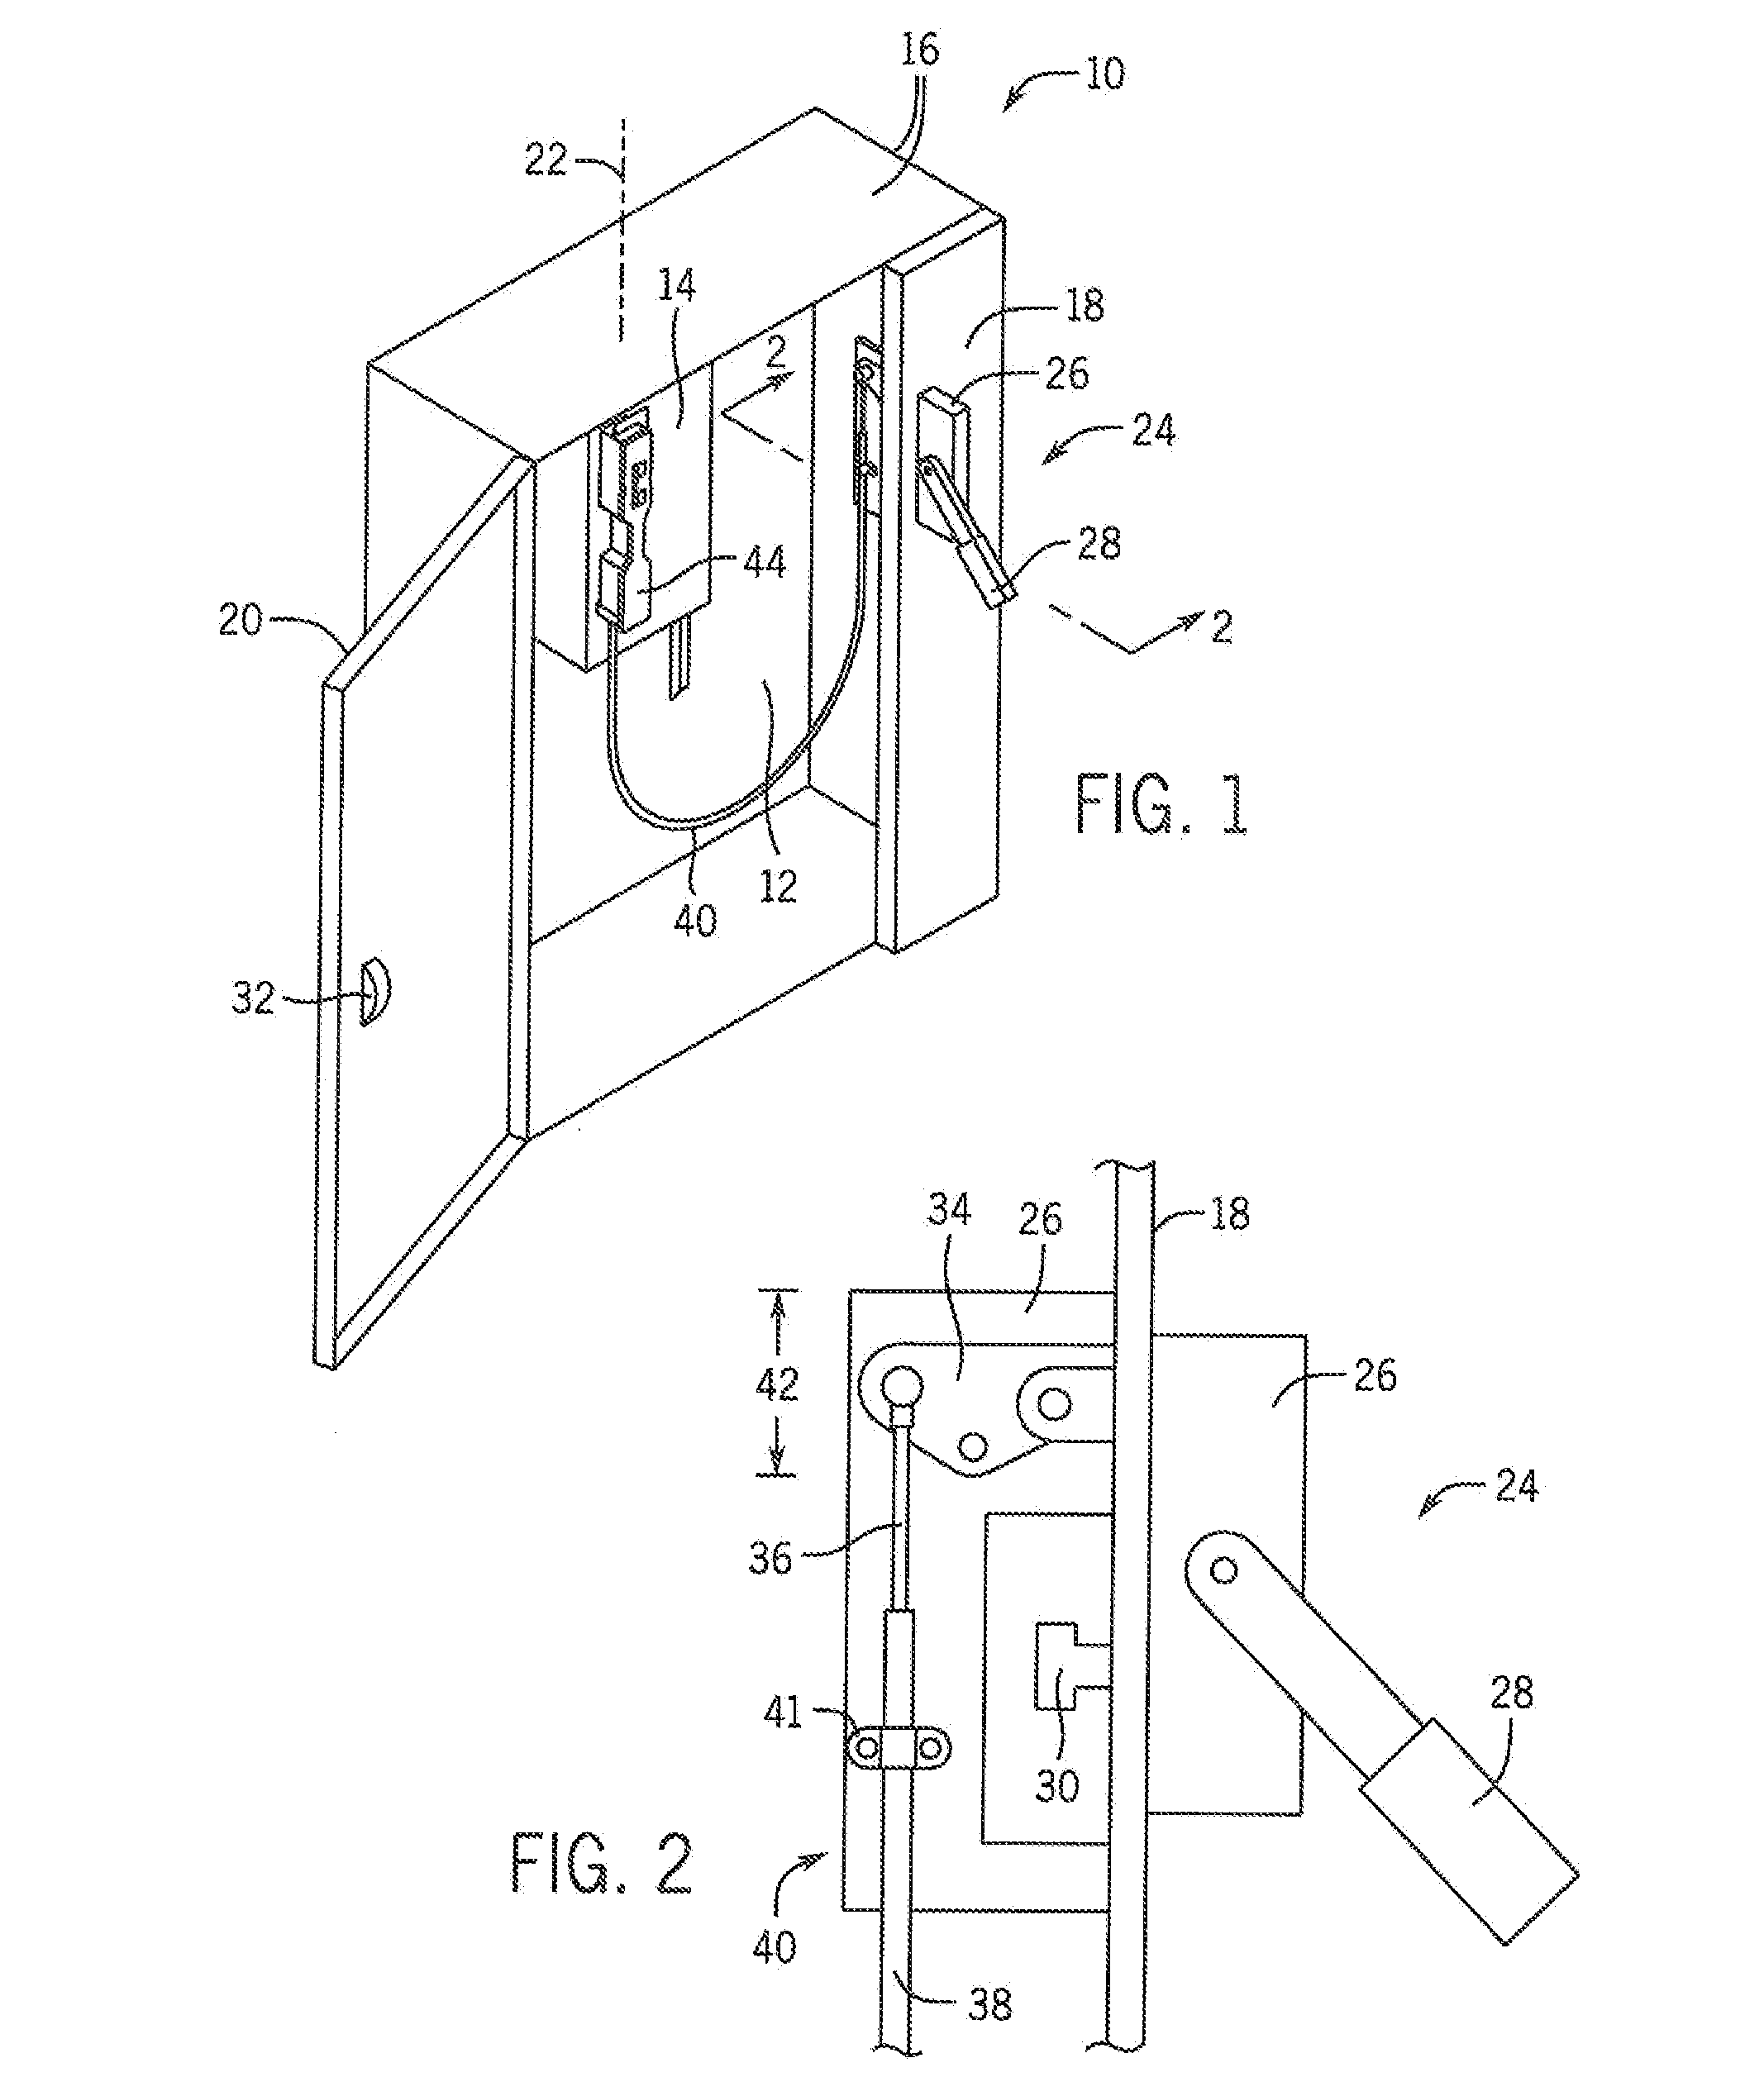 Flexible cable assembly for high-power switch gear